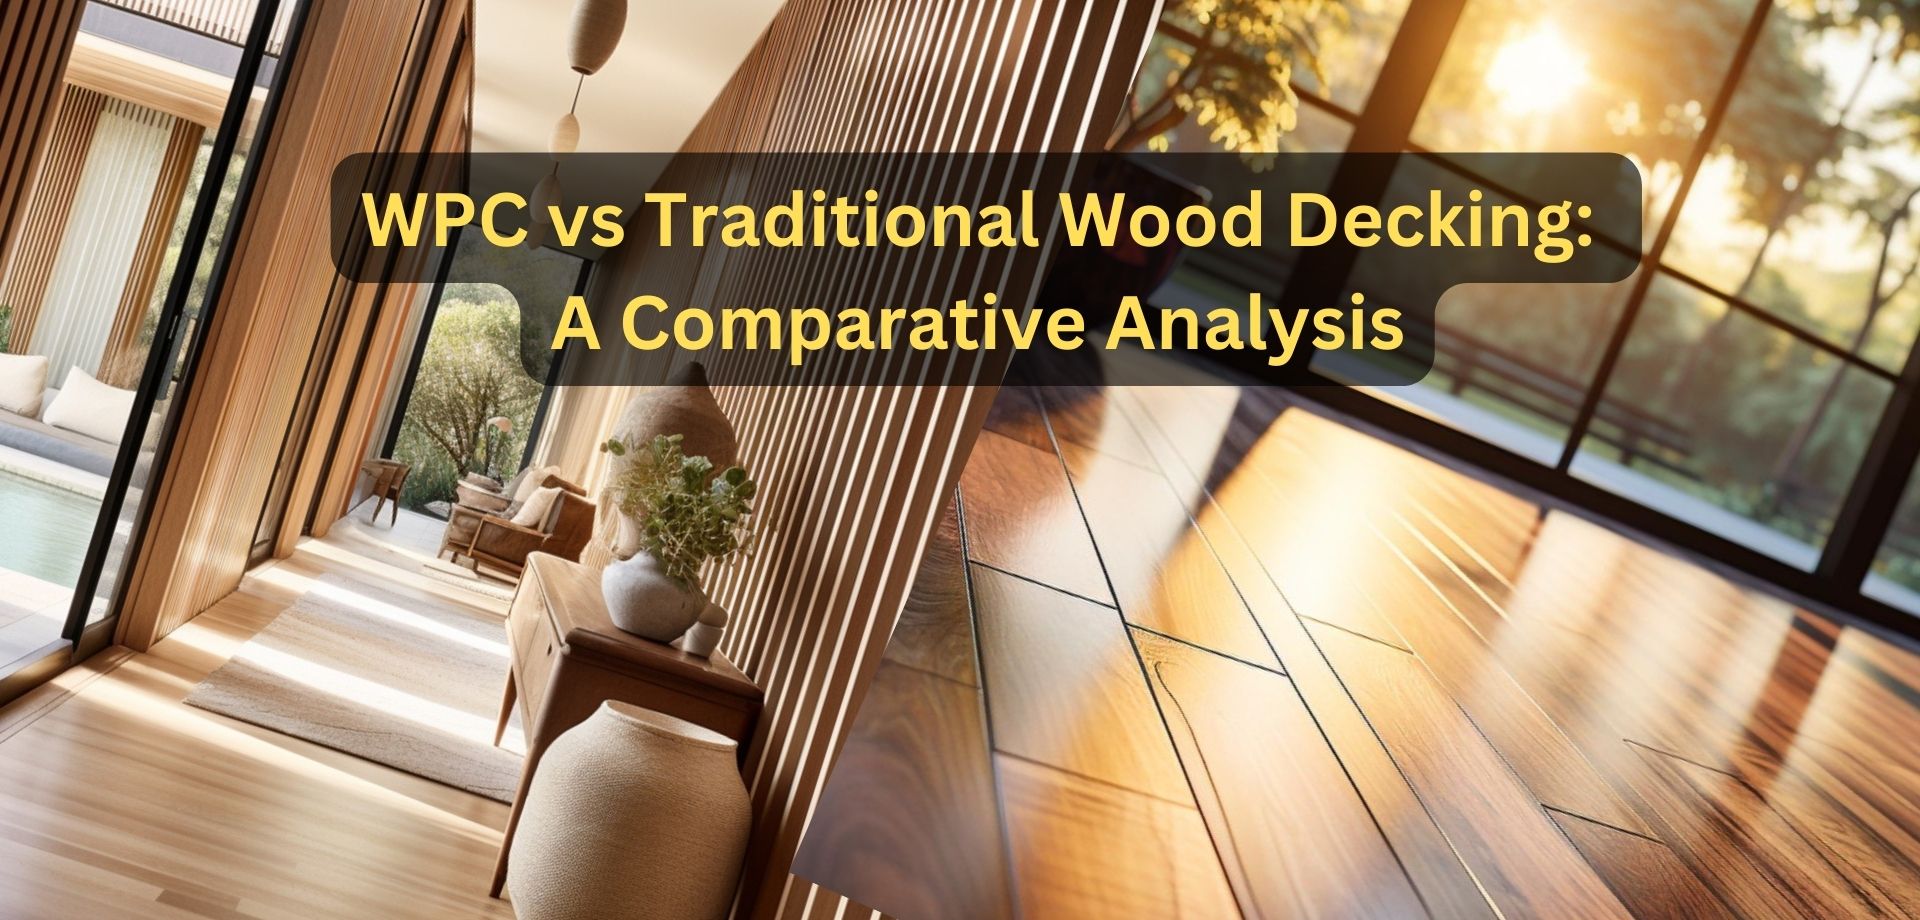 WPC vs Traditional Wood Decking: A Comparative Analysis